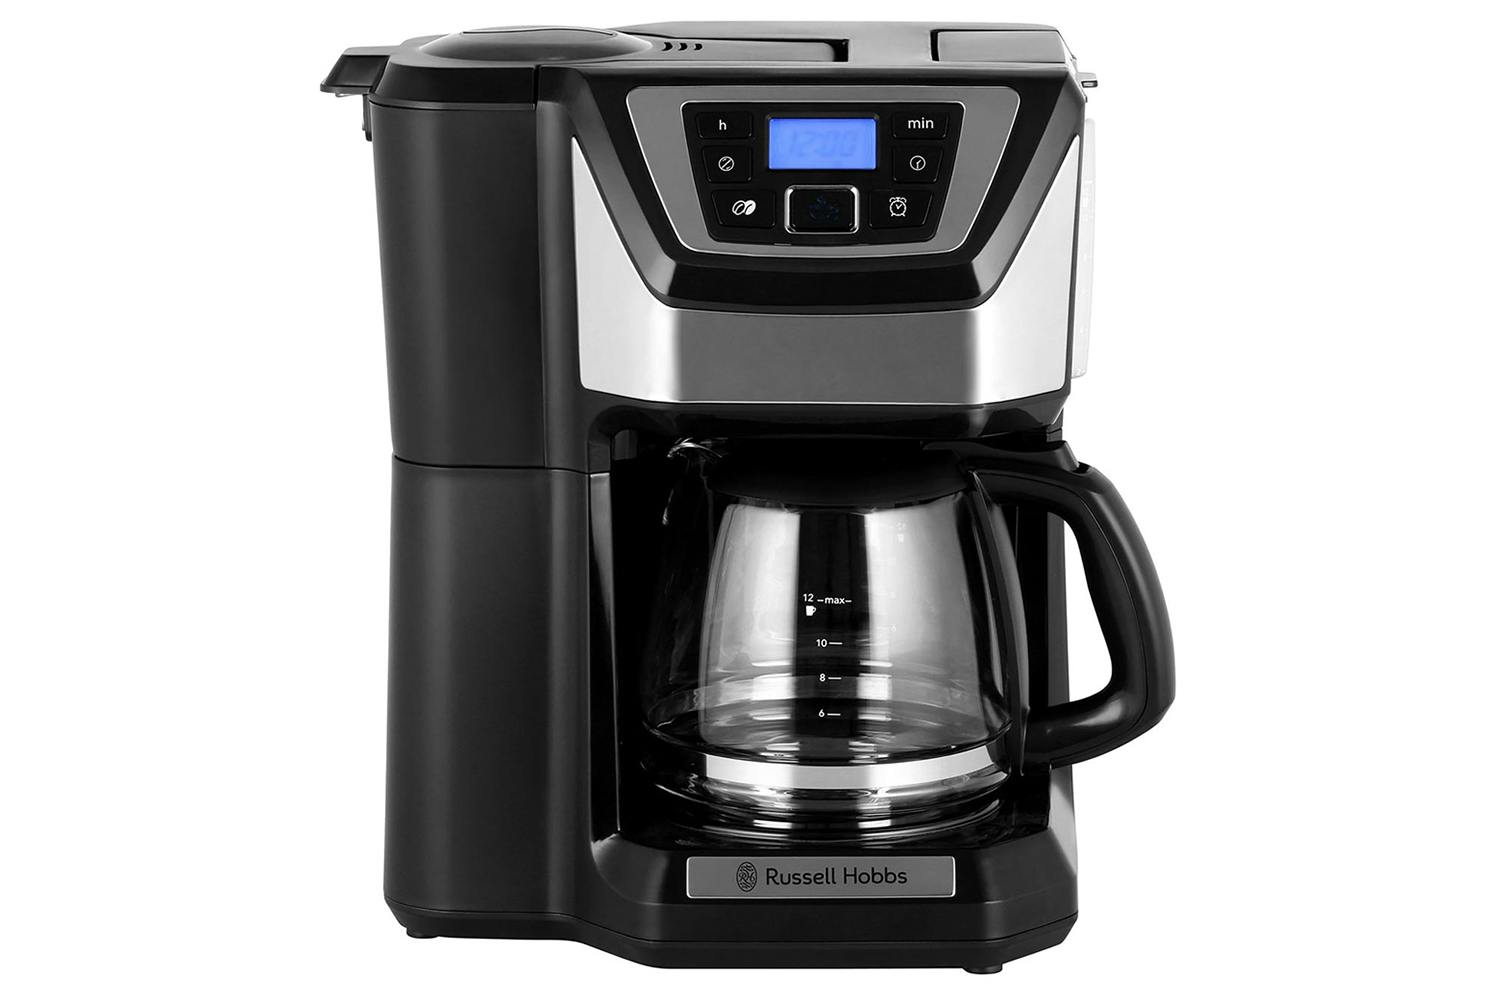 https://hniesfp.imgix.net/8/images/detailed/223/Coffee_Machine_Russell_Hobbs_22000.jpg?fit=fill&bg=0FFF&w=1500&h=1000&auto=format,compress